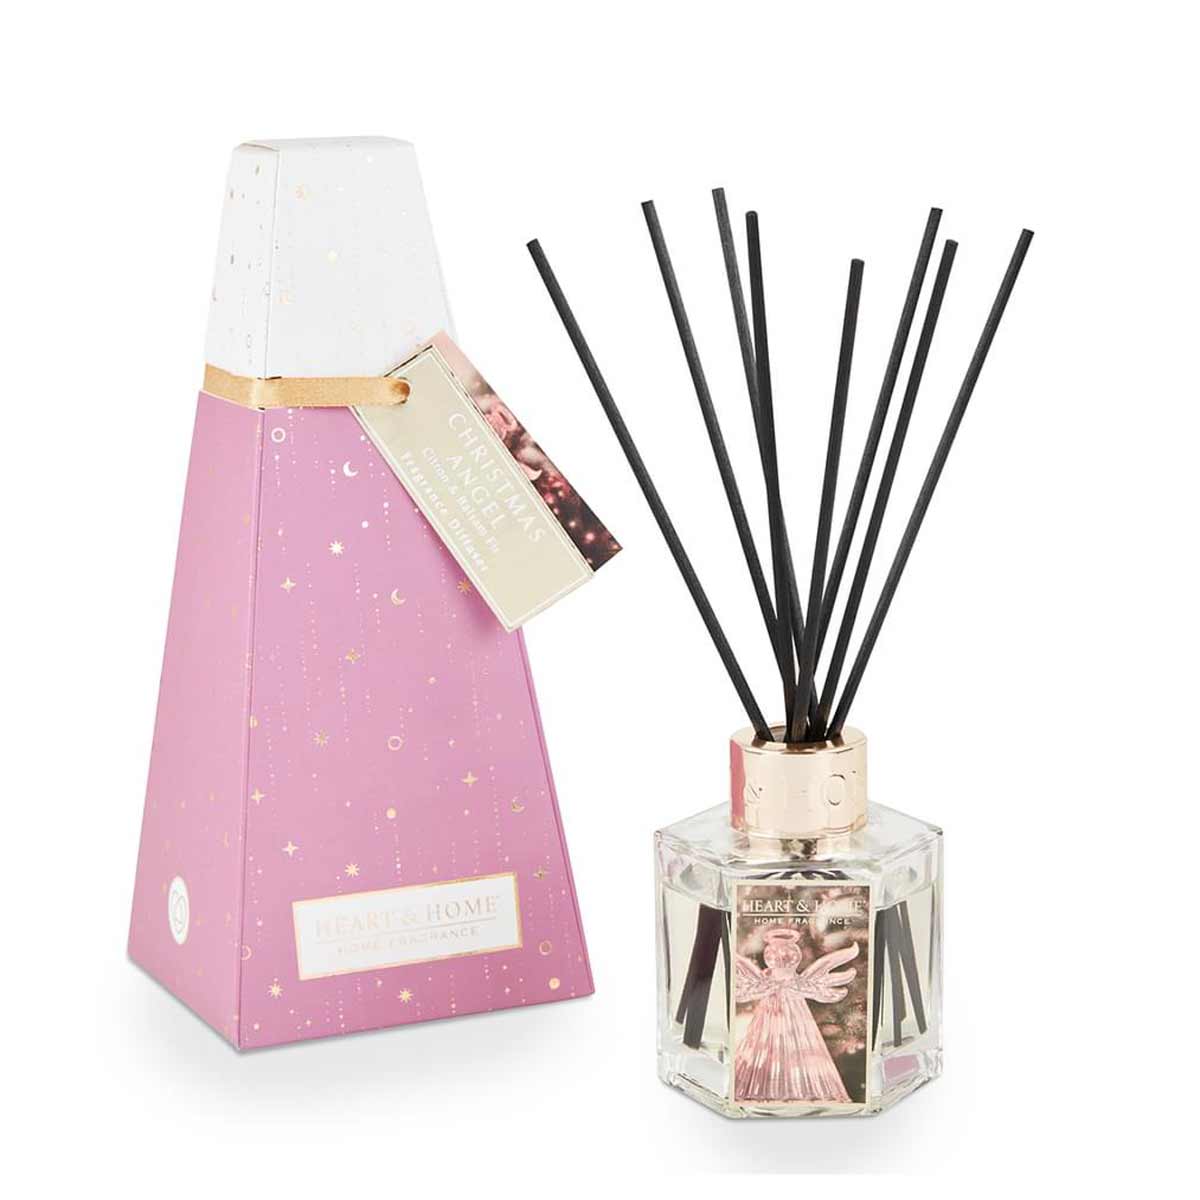 Heart and Home stick diffuser - Angel Forest